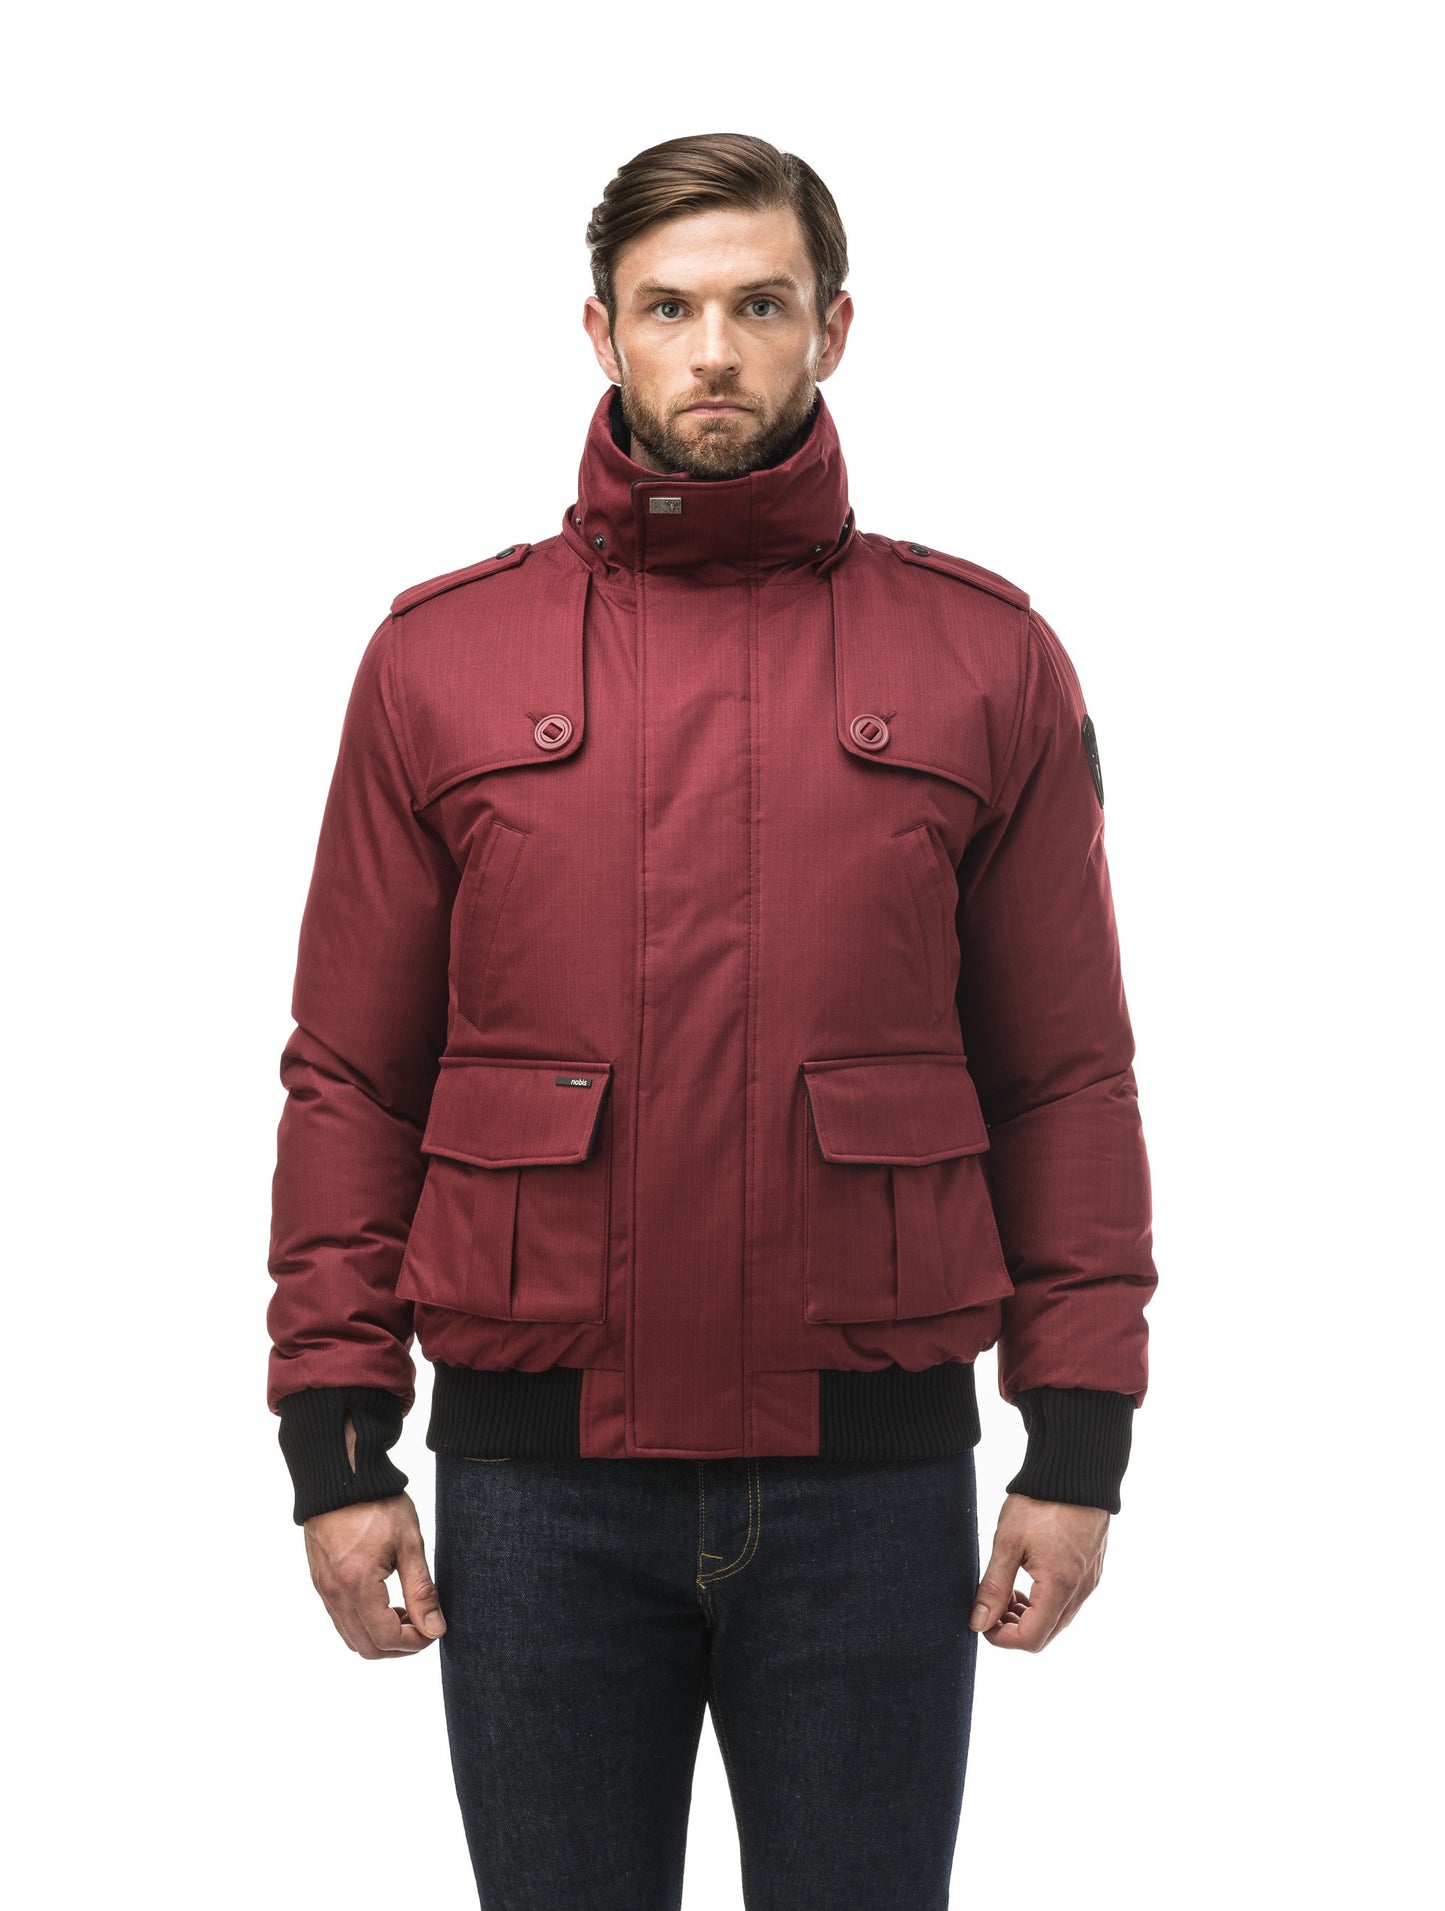 Men's down filled bomber that sits just above the hips with a completely removable hood that's windproof, waterproof, and breathable in CH Cabernet